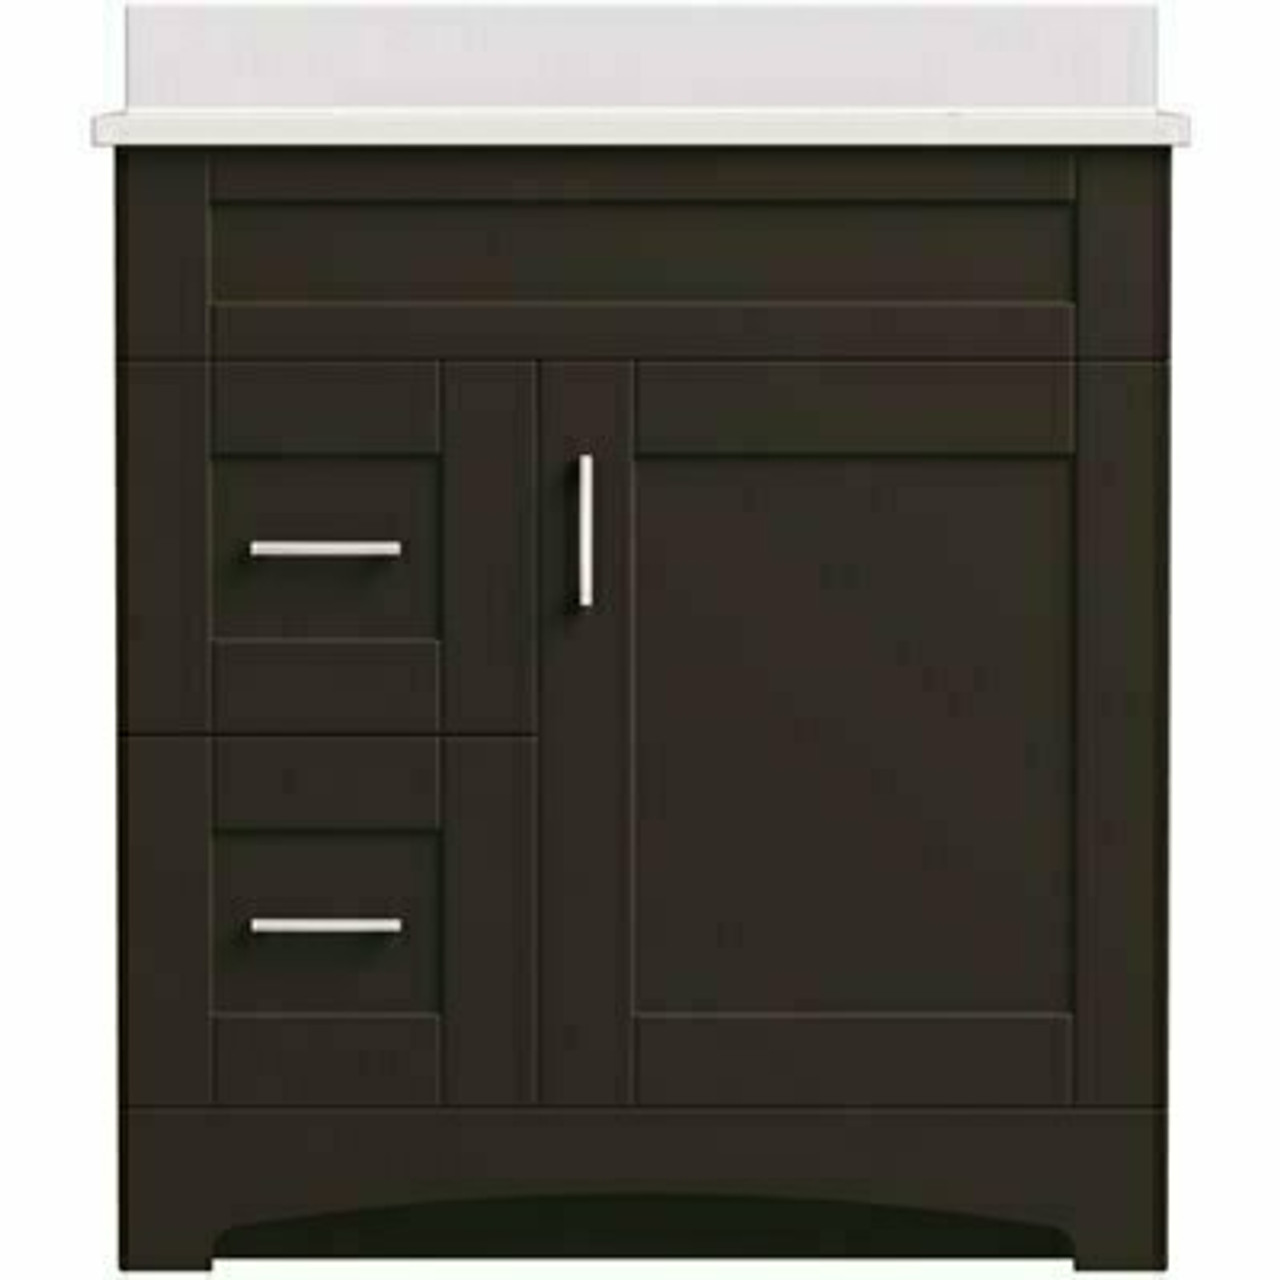 Magickwoods Brixton 30 In. W X 18 In. D Bath Vanity Cabinet In Dark Chestnut With Left Hand Side Drawers